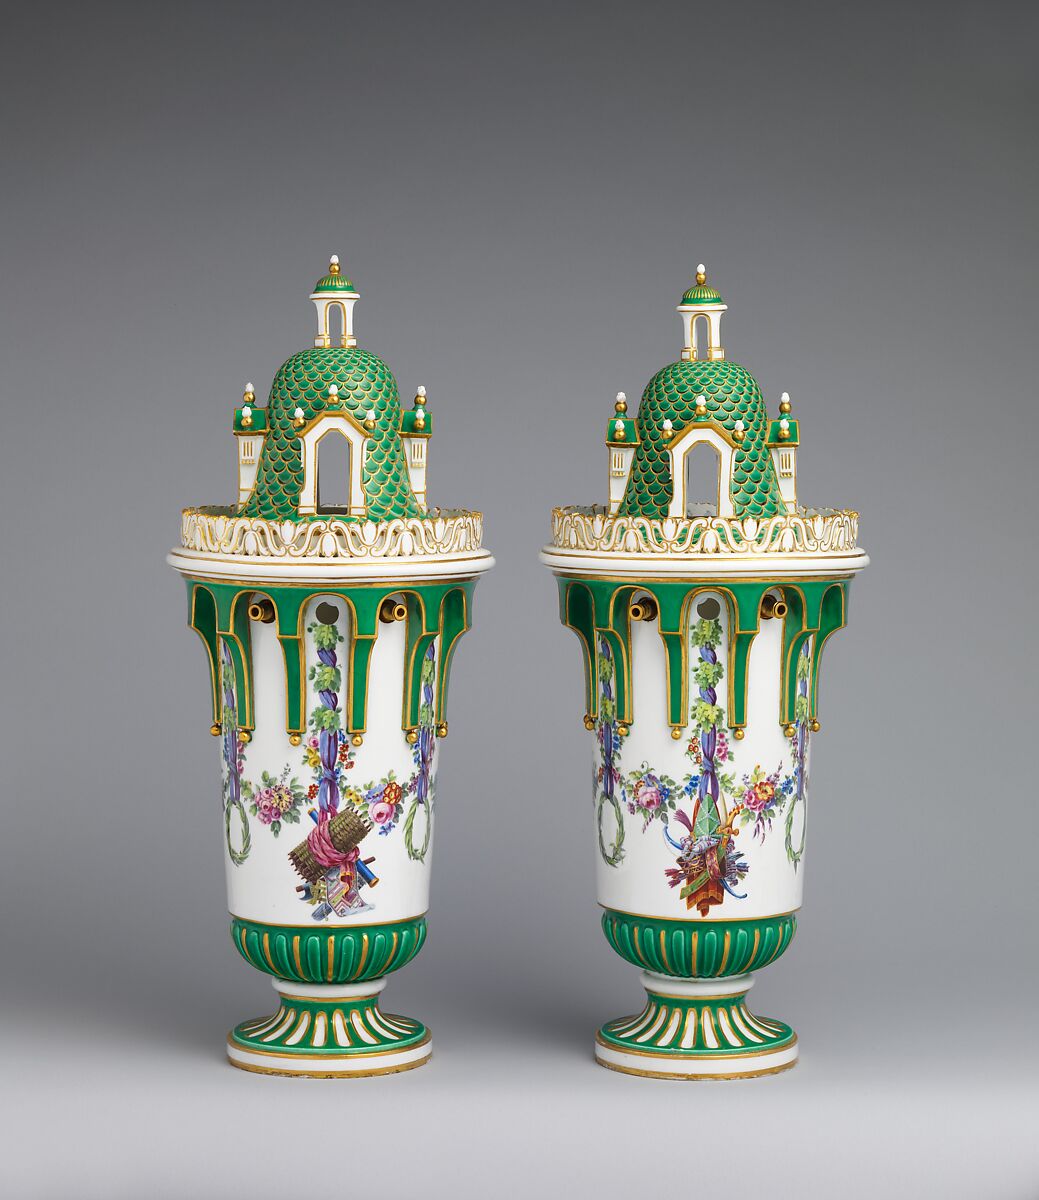 Vase with cover (Vase en tour) (one of a pair), Sèvres Manufactory (French, 1740–present), Soft-paste porcelain decorated in polychrome enamels, gold, French, Sèvres 